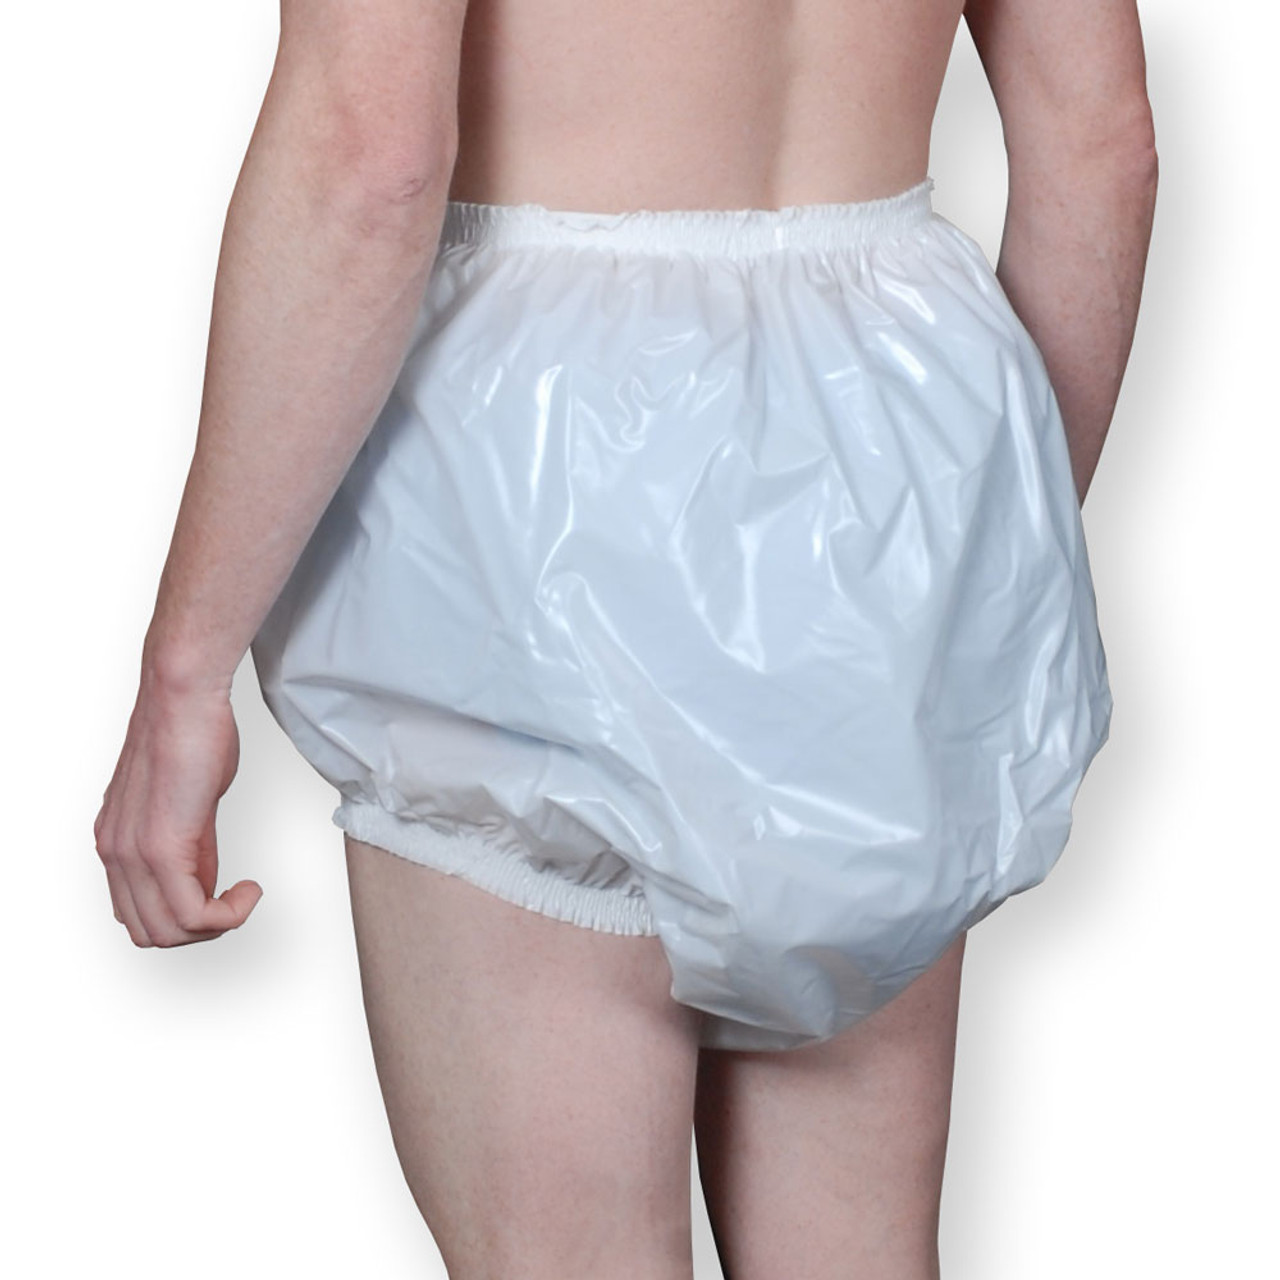 Adult Baby PLASTIC PANTS. Baby Soft Transparent . Comfy, Sissy. Abdl Pvc  Pants. Large Leg. Wide Crotch. Waterproof. Can Make to Order Too. 